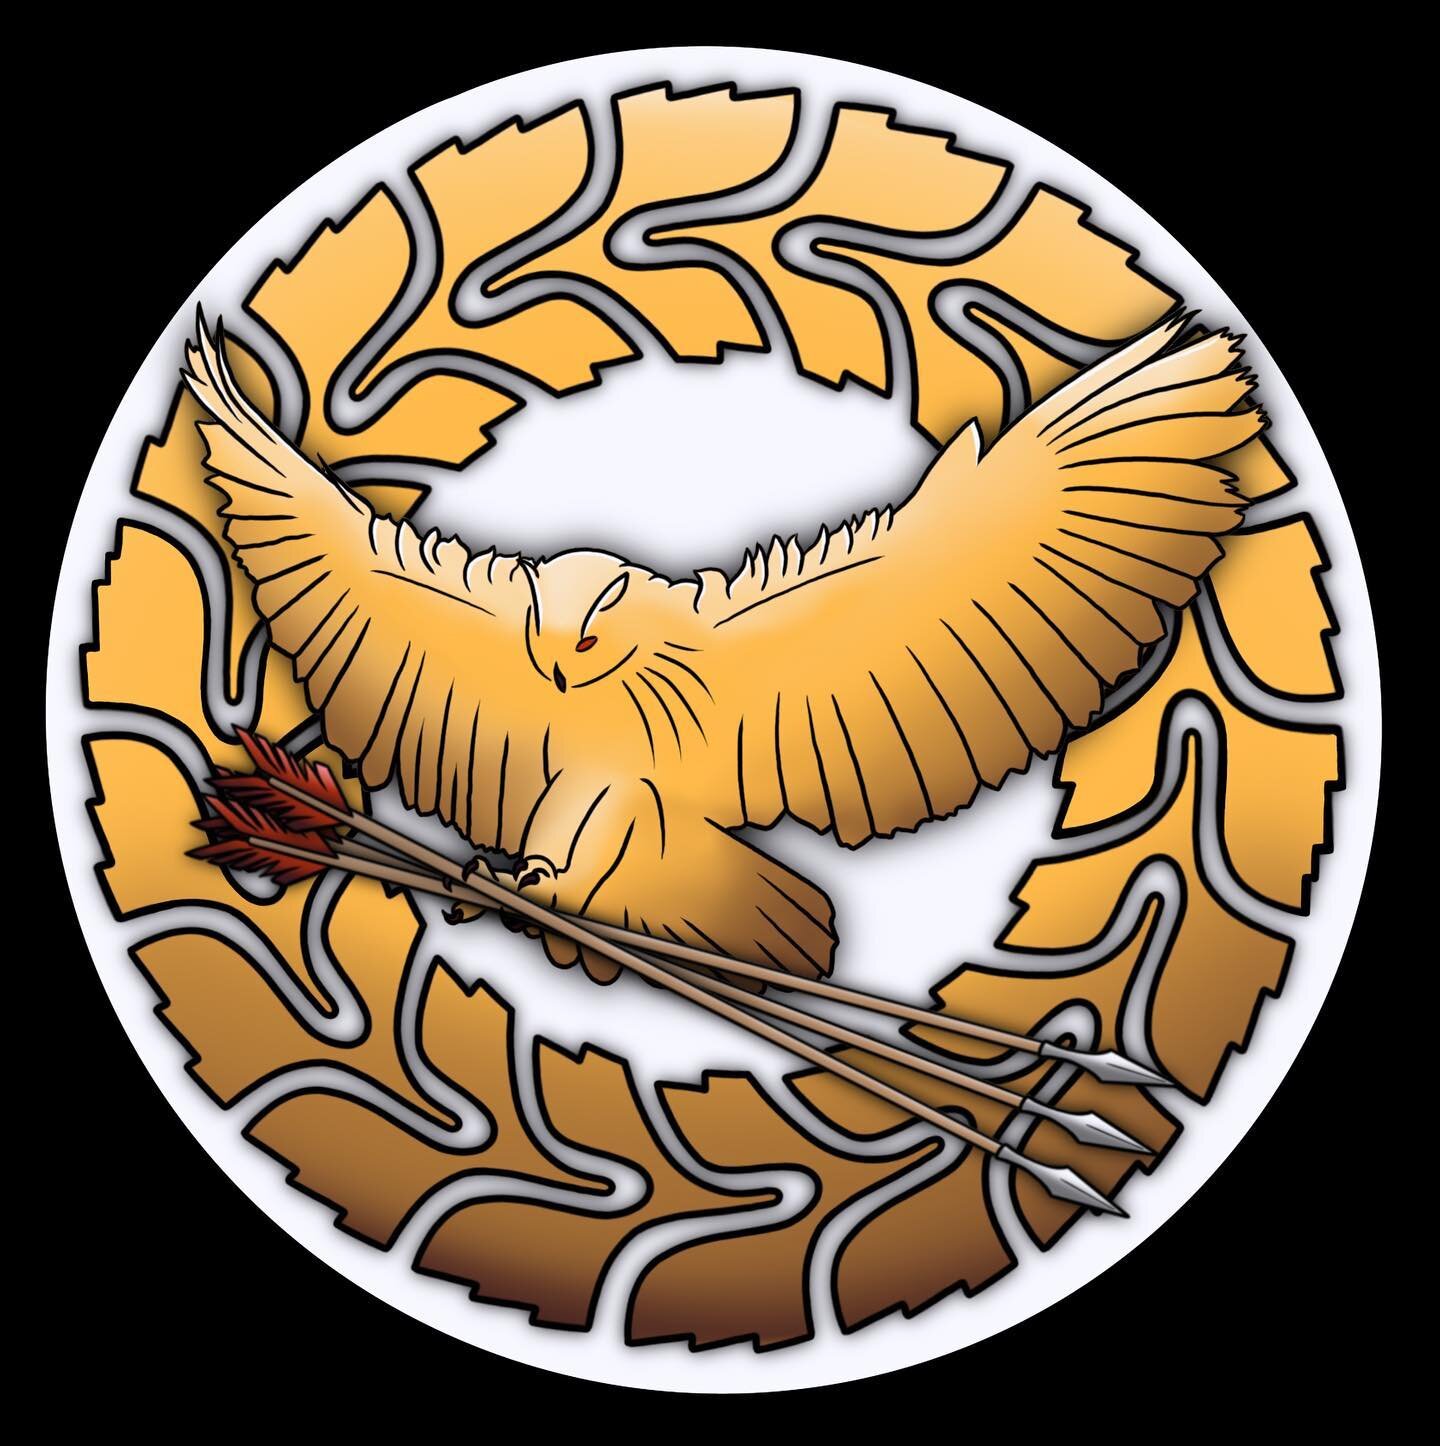 The seal of the Fortuna Family. One of the newest of the dynastic corporate families, the Fortuna have made their name manufacturing cutting edge light starships and spaceplanes.

#scifiworldbuilding #scifinovel #scifinovels #scifibook #scifibooks